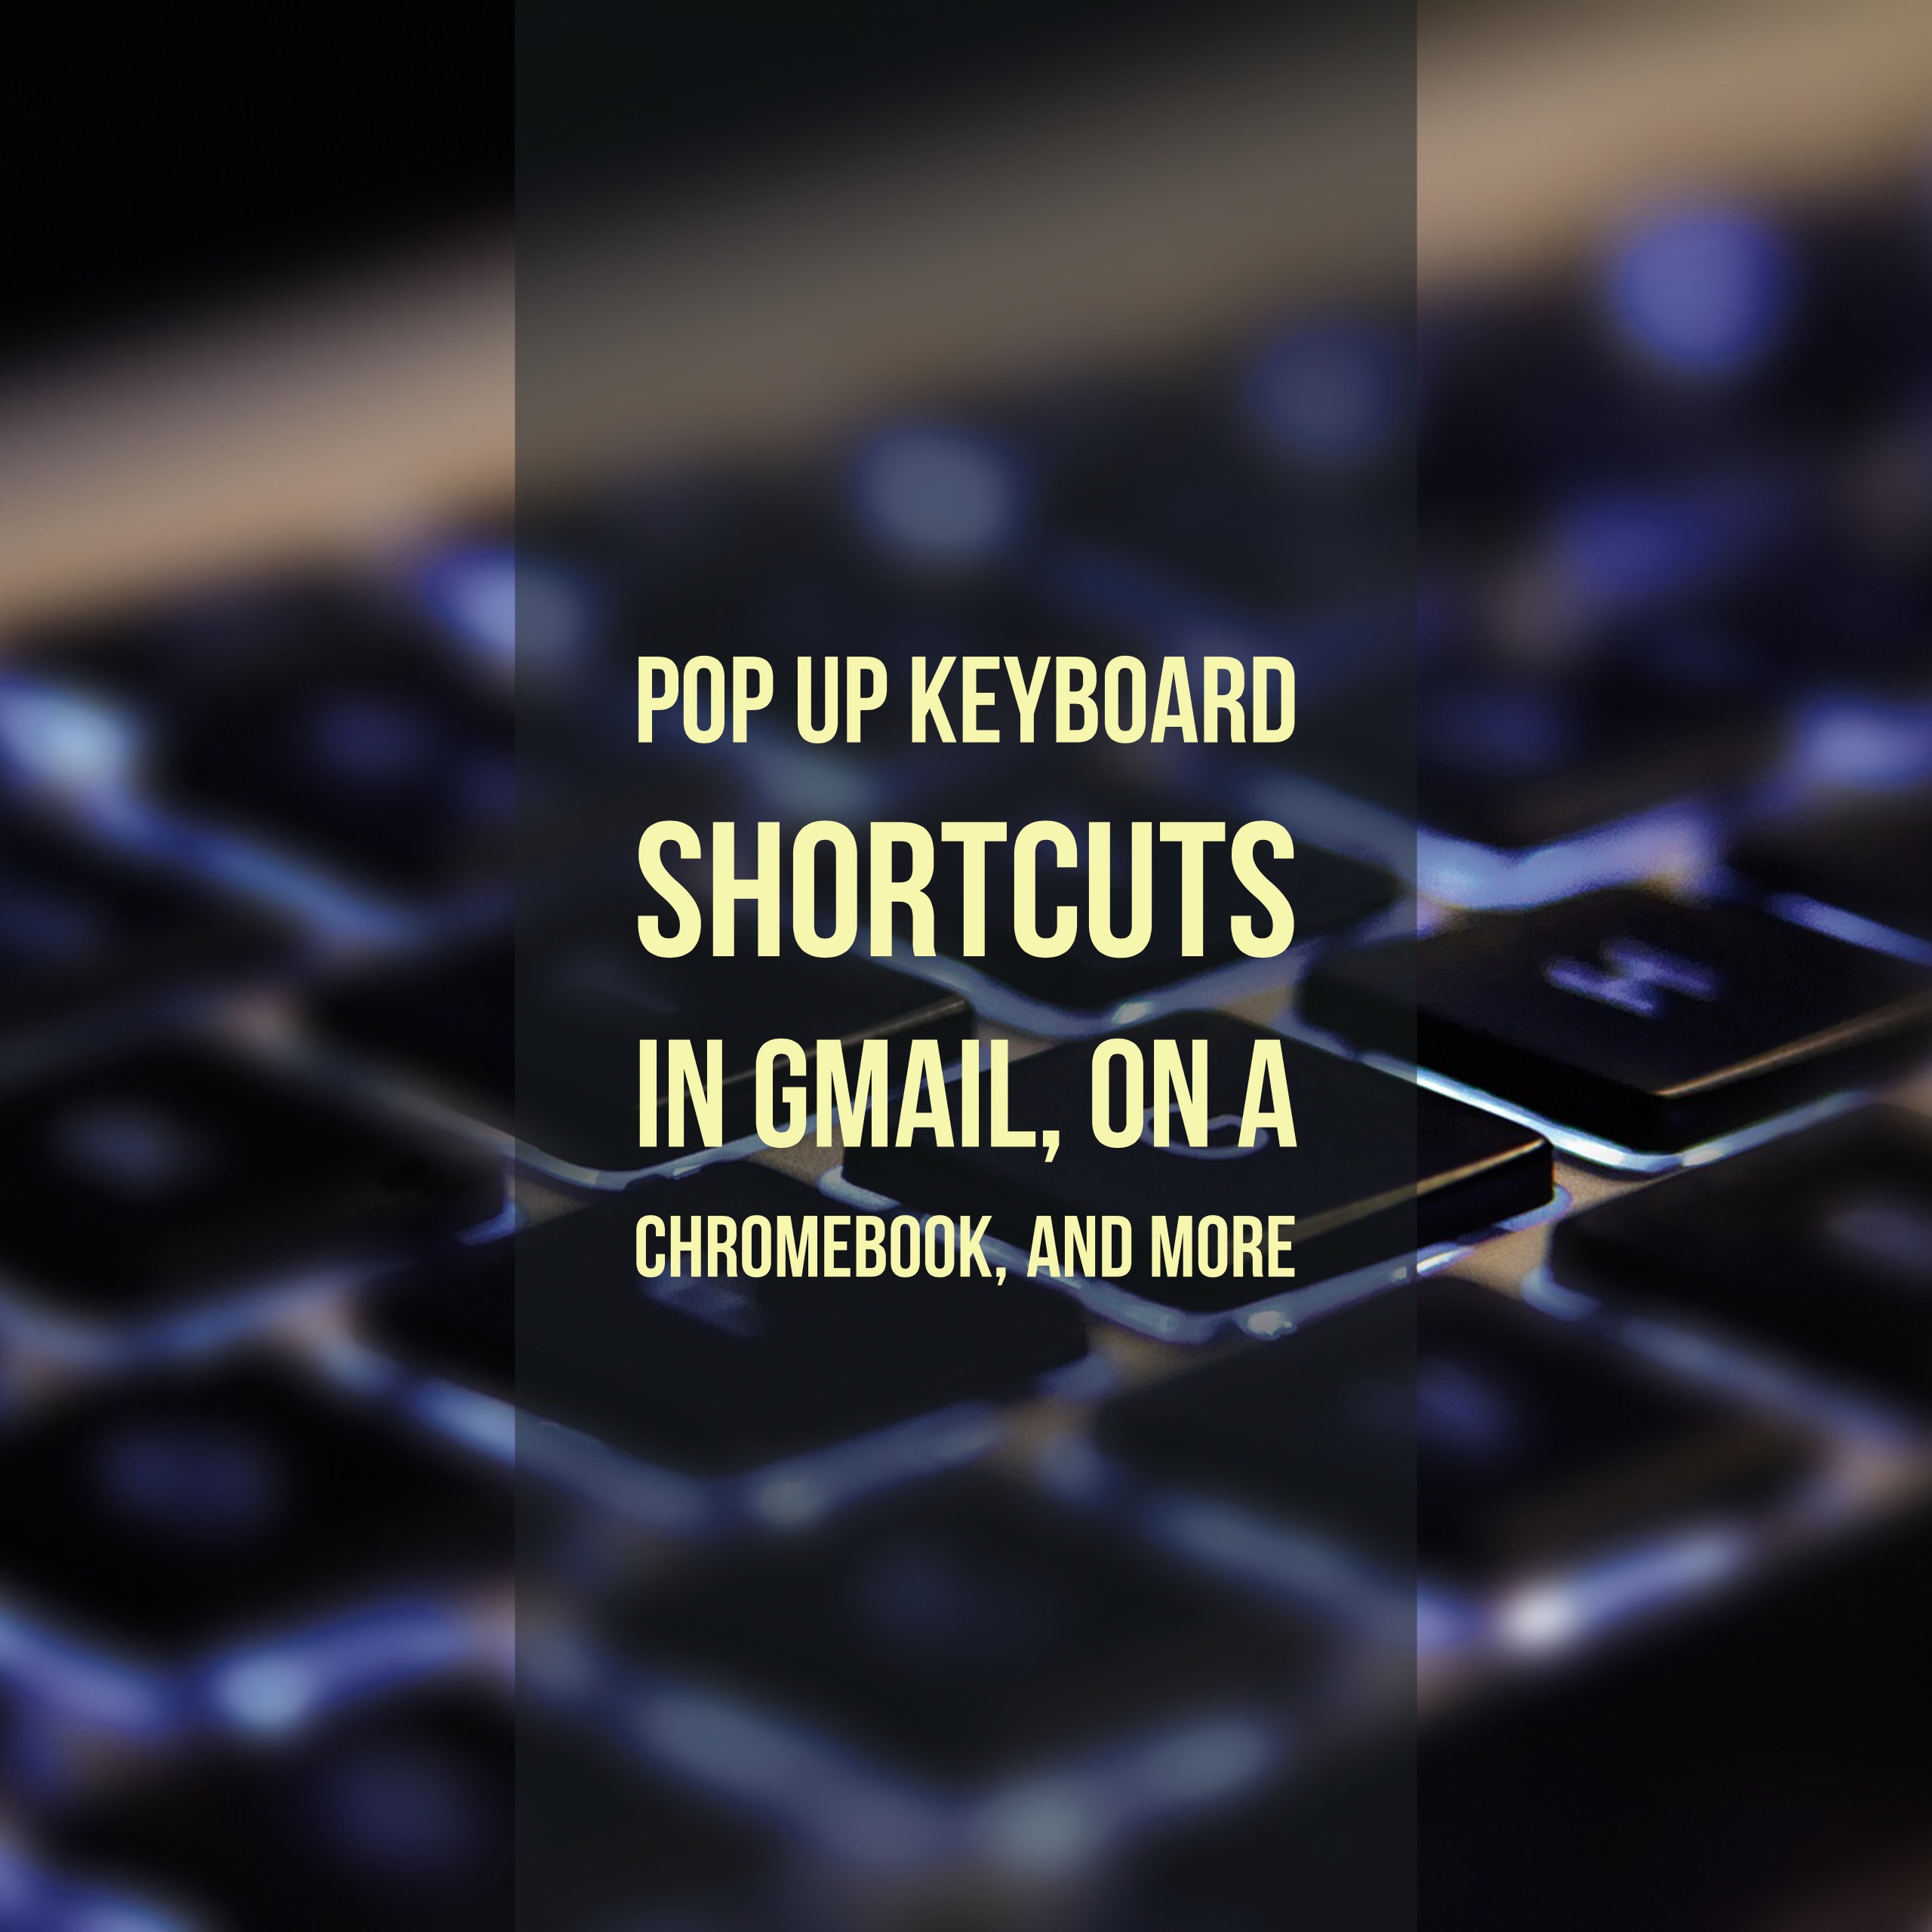 Pop up keyboard shortcuts in Gmail, on a Chromebook, and more